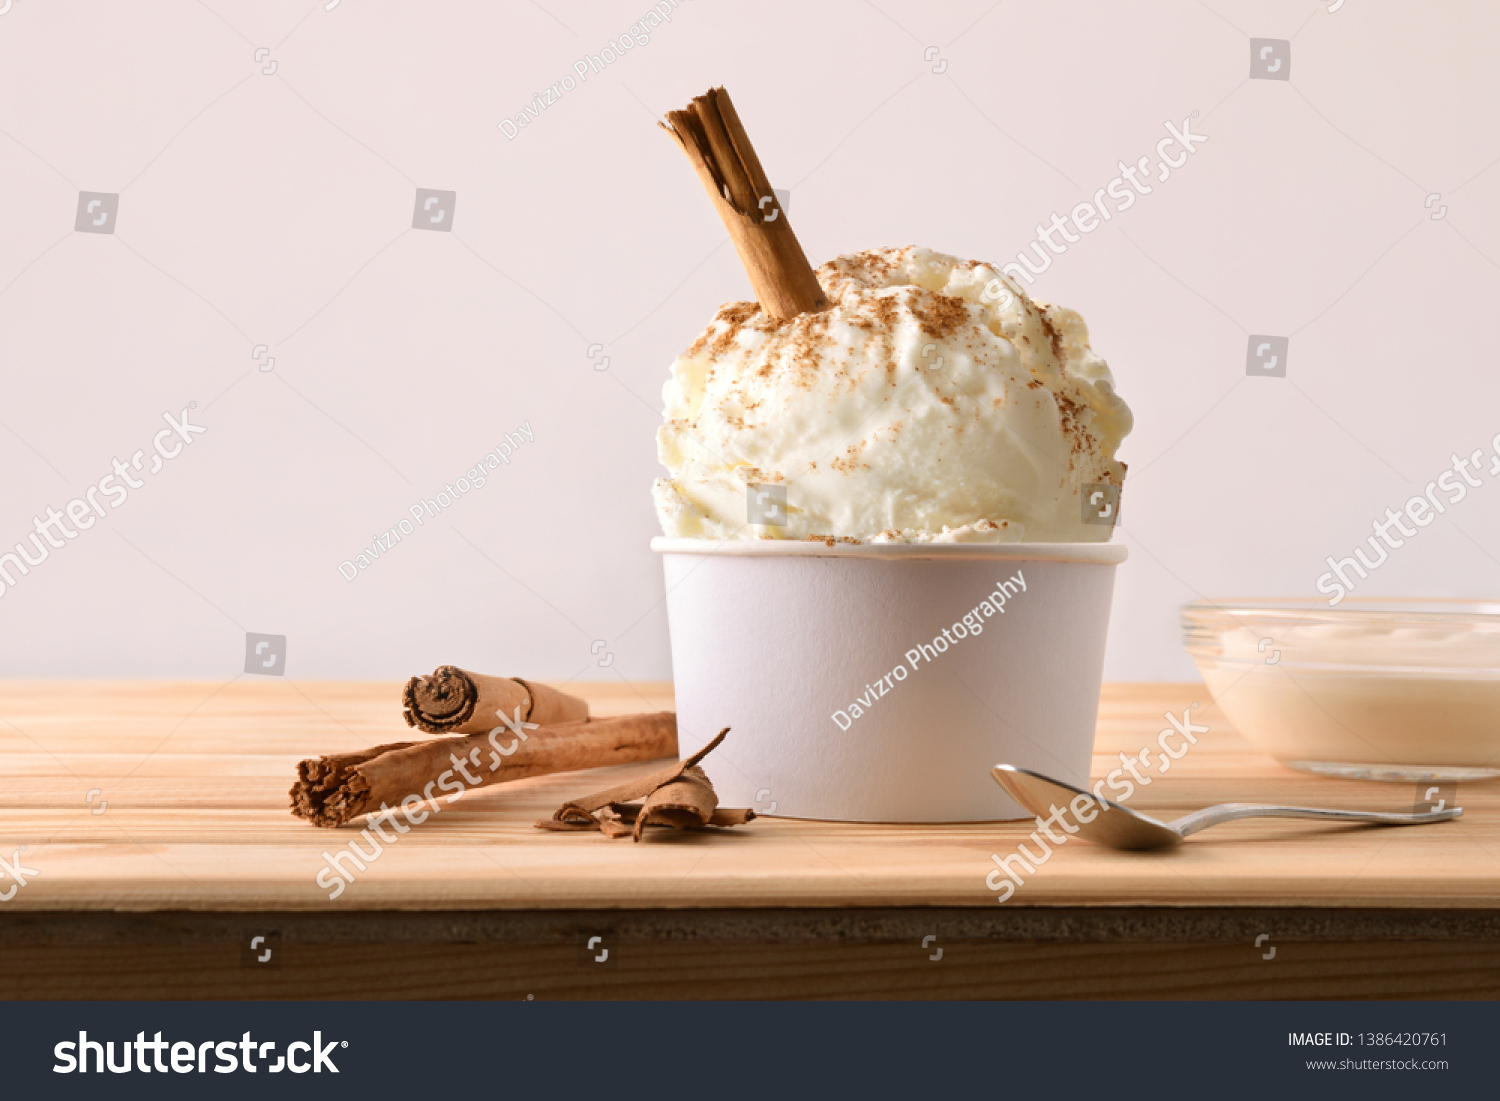 Cinnamon ice cream decorated with cinnamon sticks on a wooden table. Horizontal composition. Front view. #1386420761